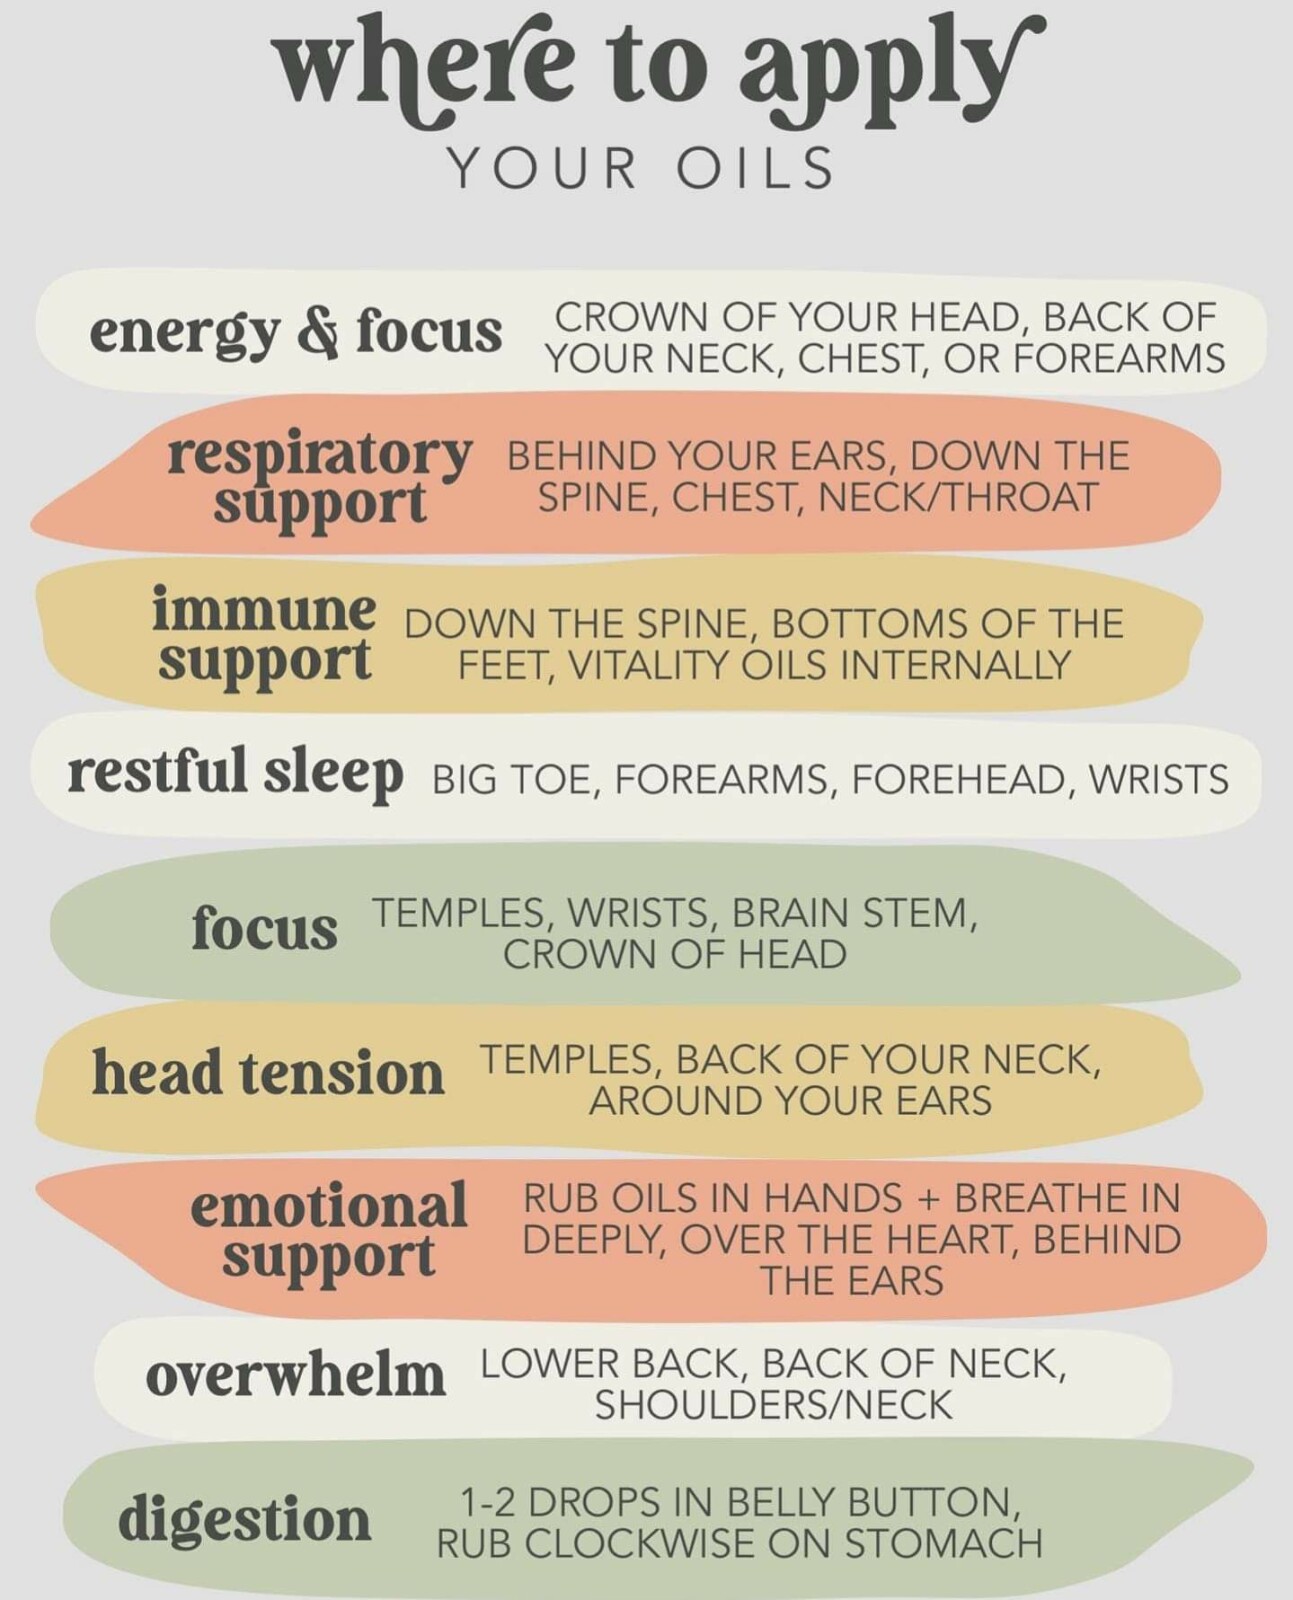 Where to Apply your Oils